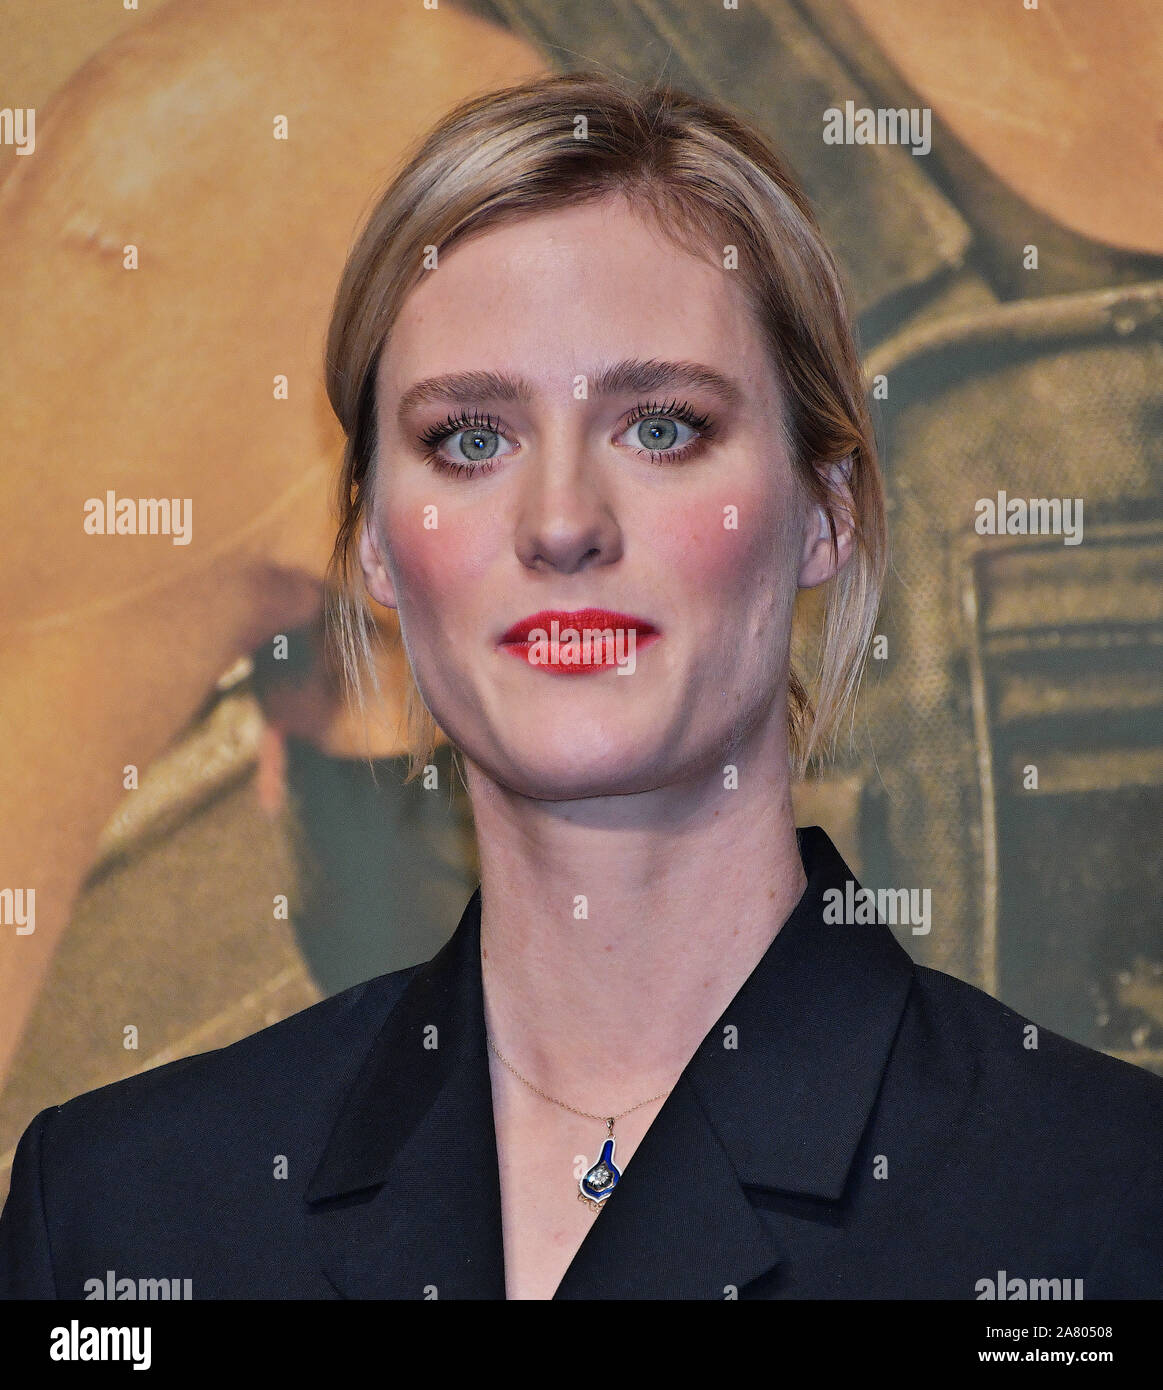 Tokyo, Japan. 05th Nov, 2019. Actress Mackenzie Davis attends the press conference for the film "Terminator: Dark Fate" in Tokyo, Japan on Tuesday, November 5, 2019. "Terminator: Dark Fate" set 25 years after the events of "Terminator 2", filming took place from June to November 2018 in Hungary, Spain and the United States. James Cameron return to production and actress Linda Hamilton play Sara Conner for the first time in 28 years. This film open November 8 in Japan. Photo by MORI Keizo/UPI Credit: UPI/Alamy Live News Stock Photo